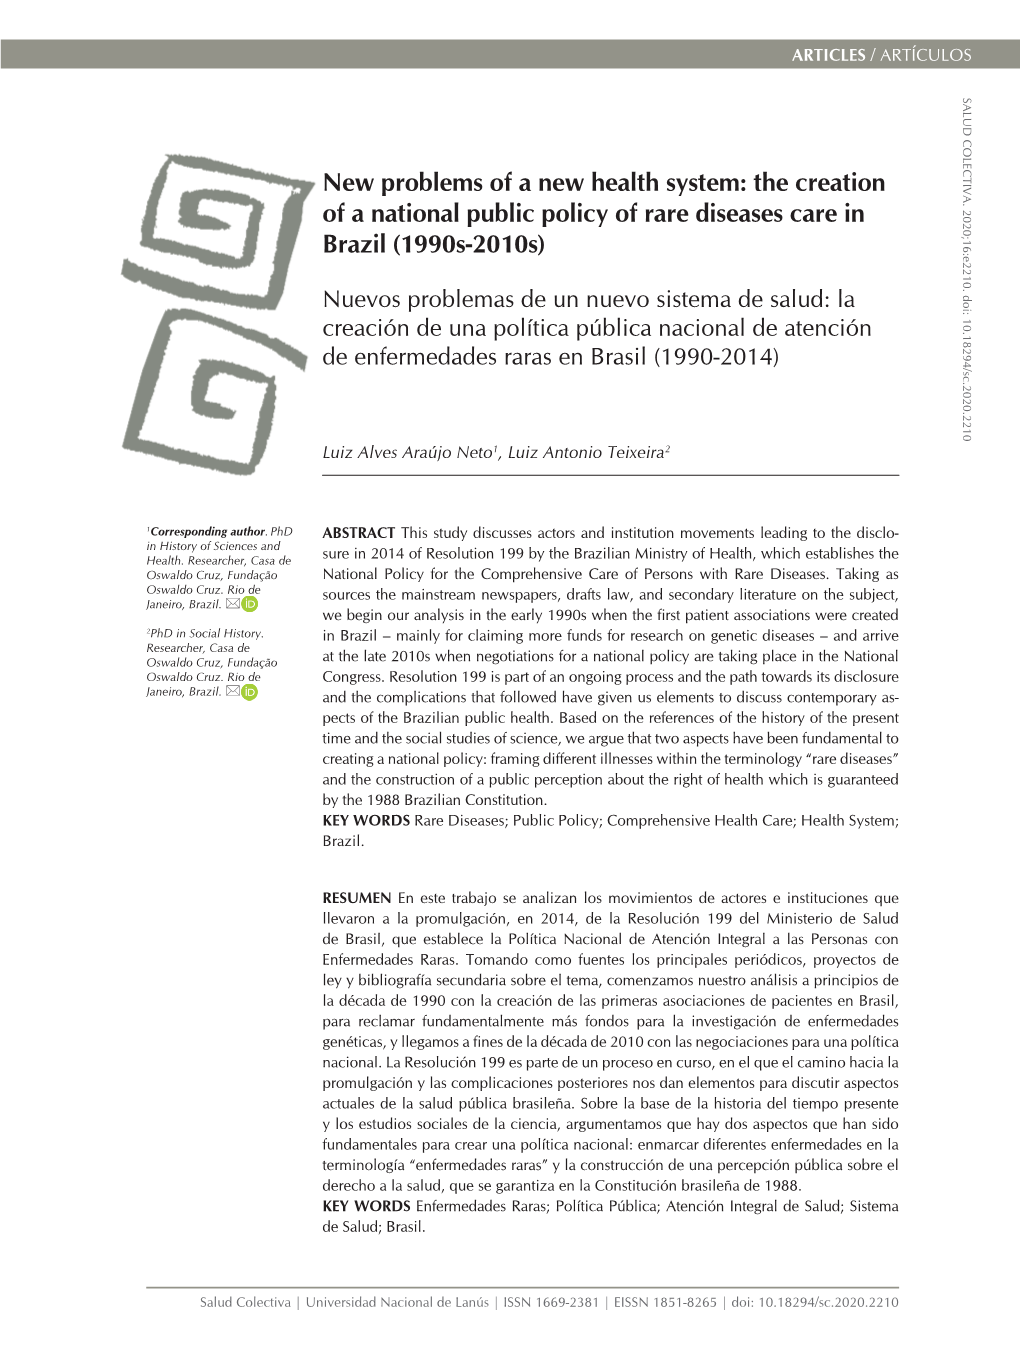 The Creation of a National Public Policy of Rare Diseases Care in Brazil (1990S-2010S)